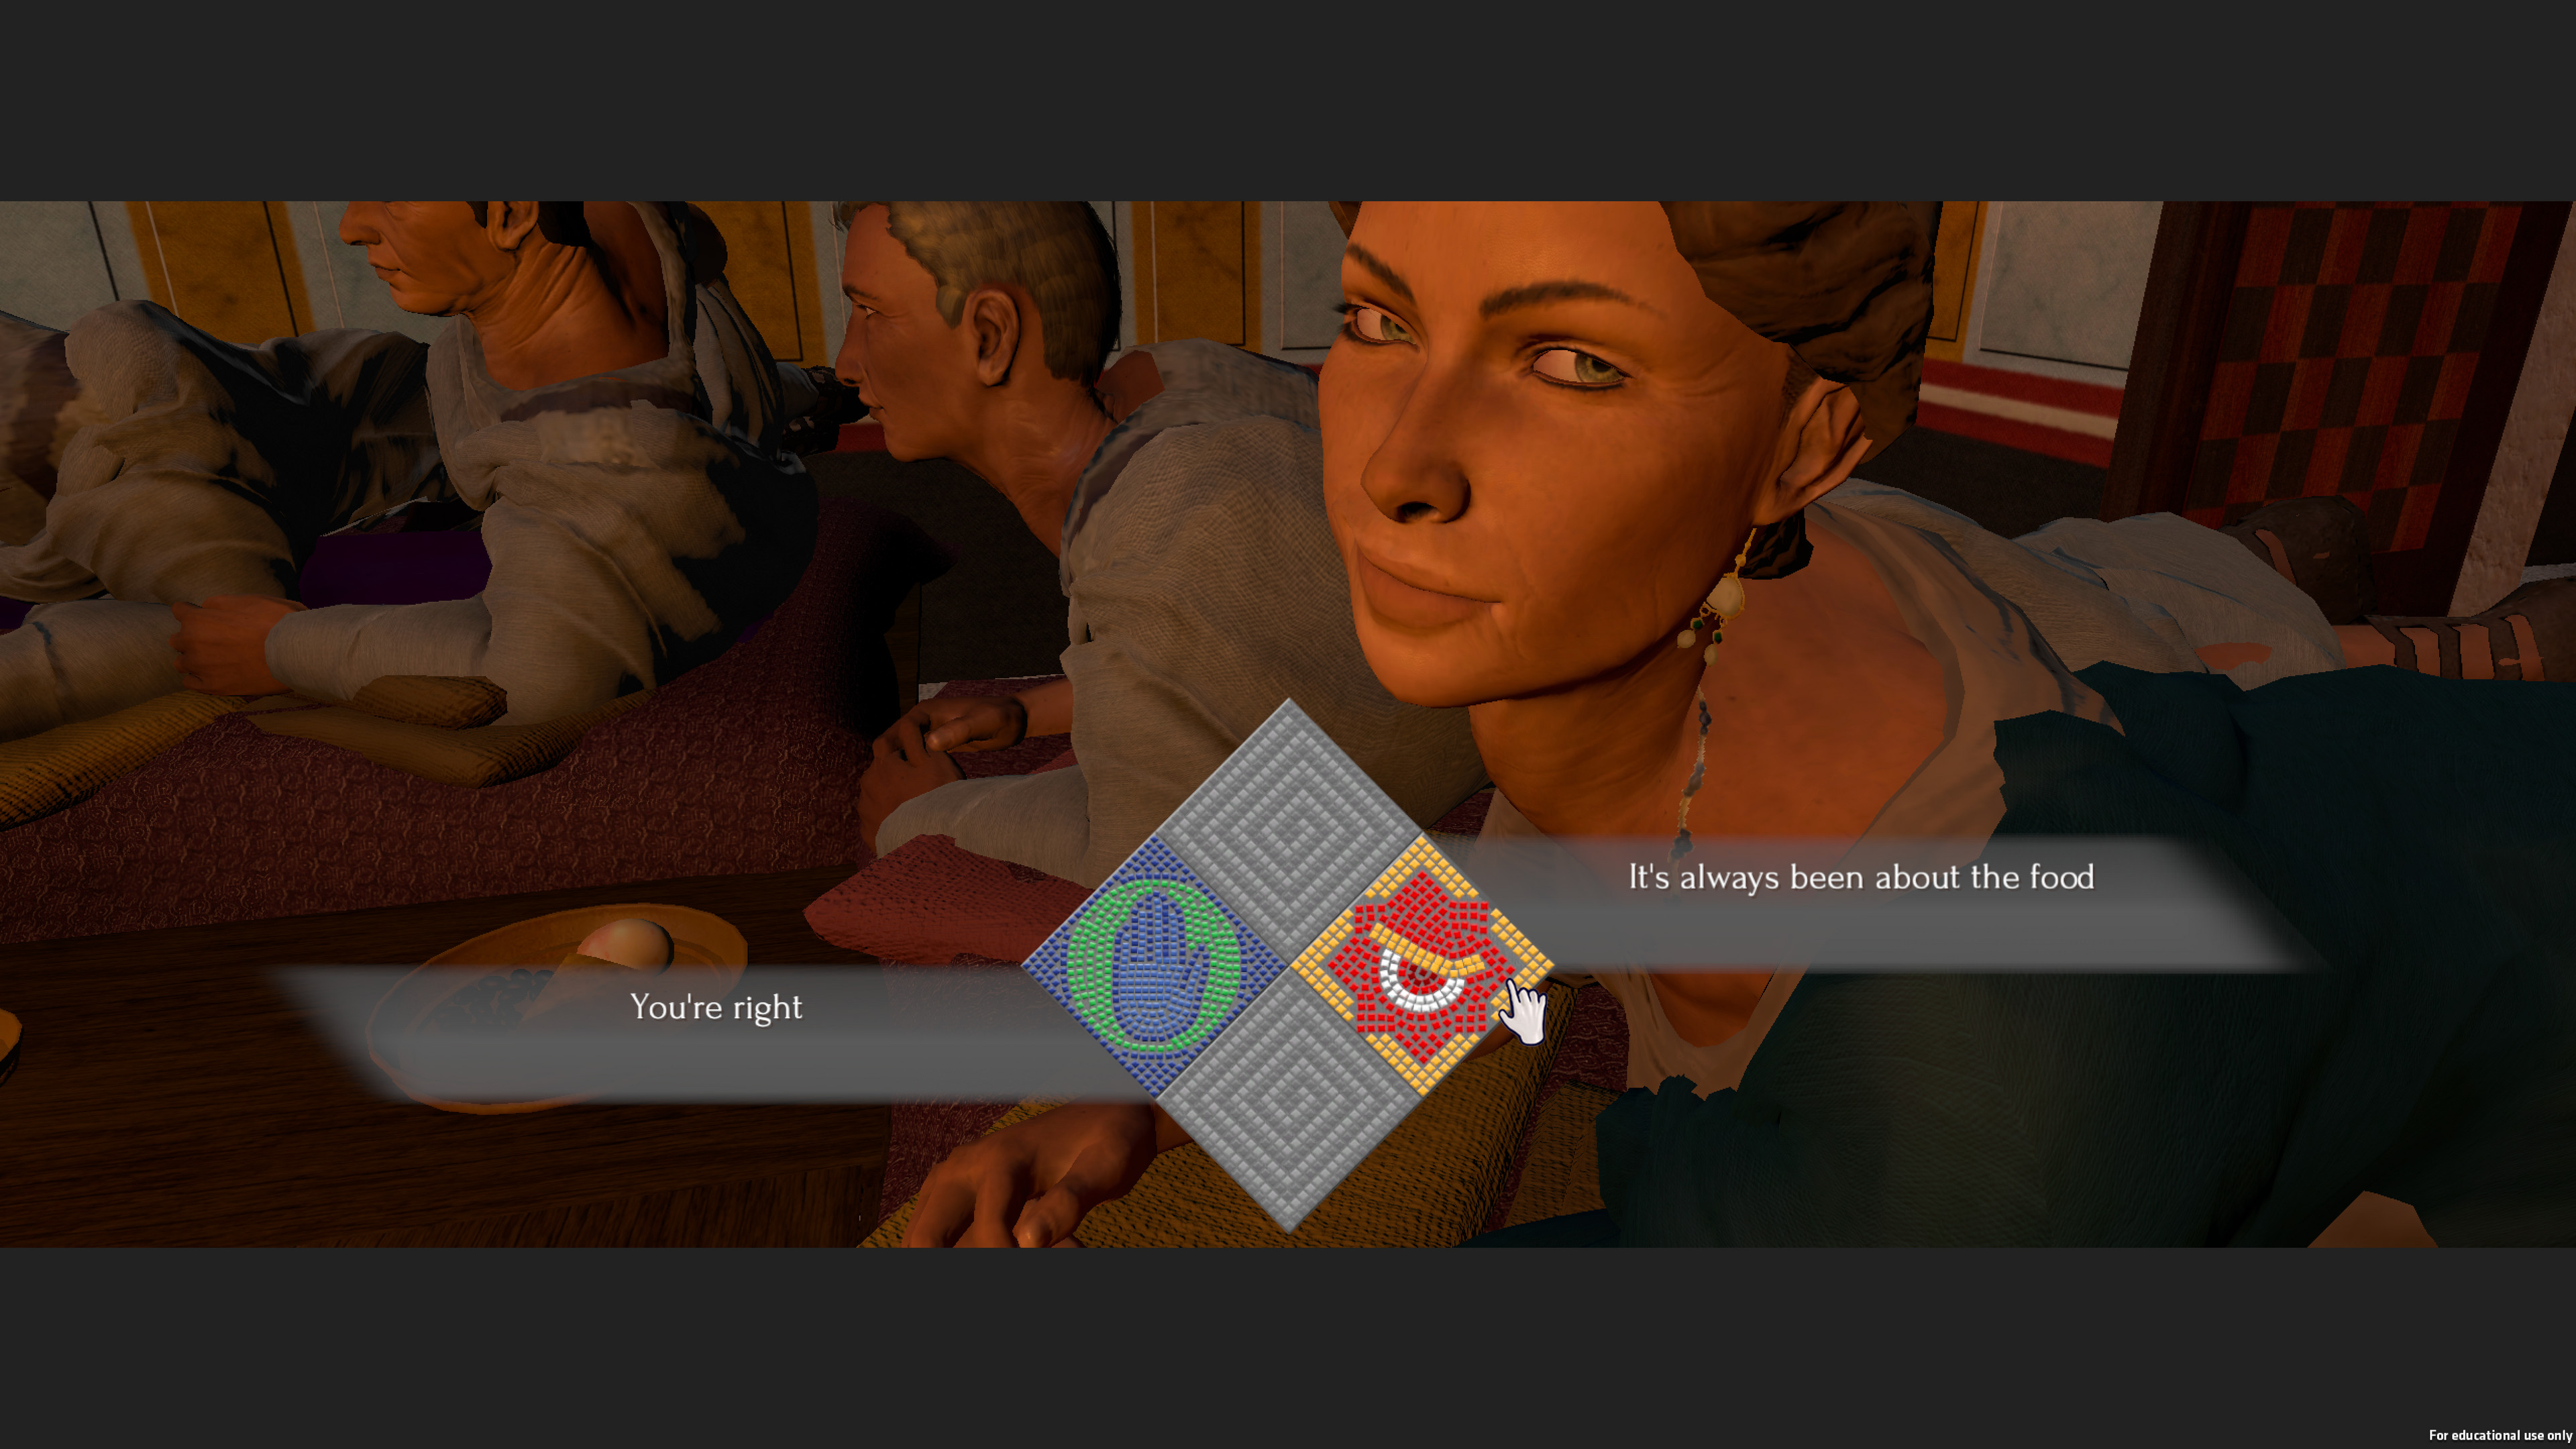 When players speak to characters they are presented different speech options with different emotional impacts. As pictured, these are coded with representative icons done in a mosaic style. 